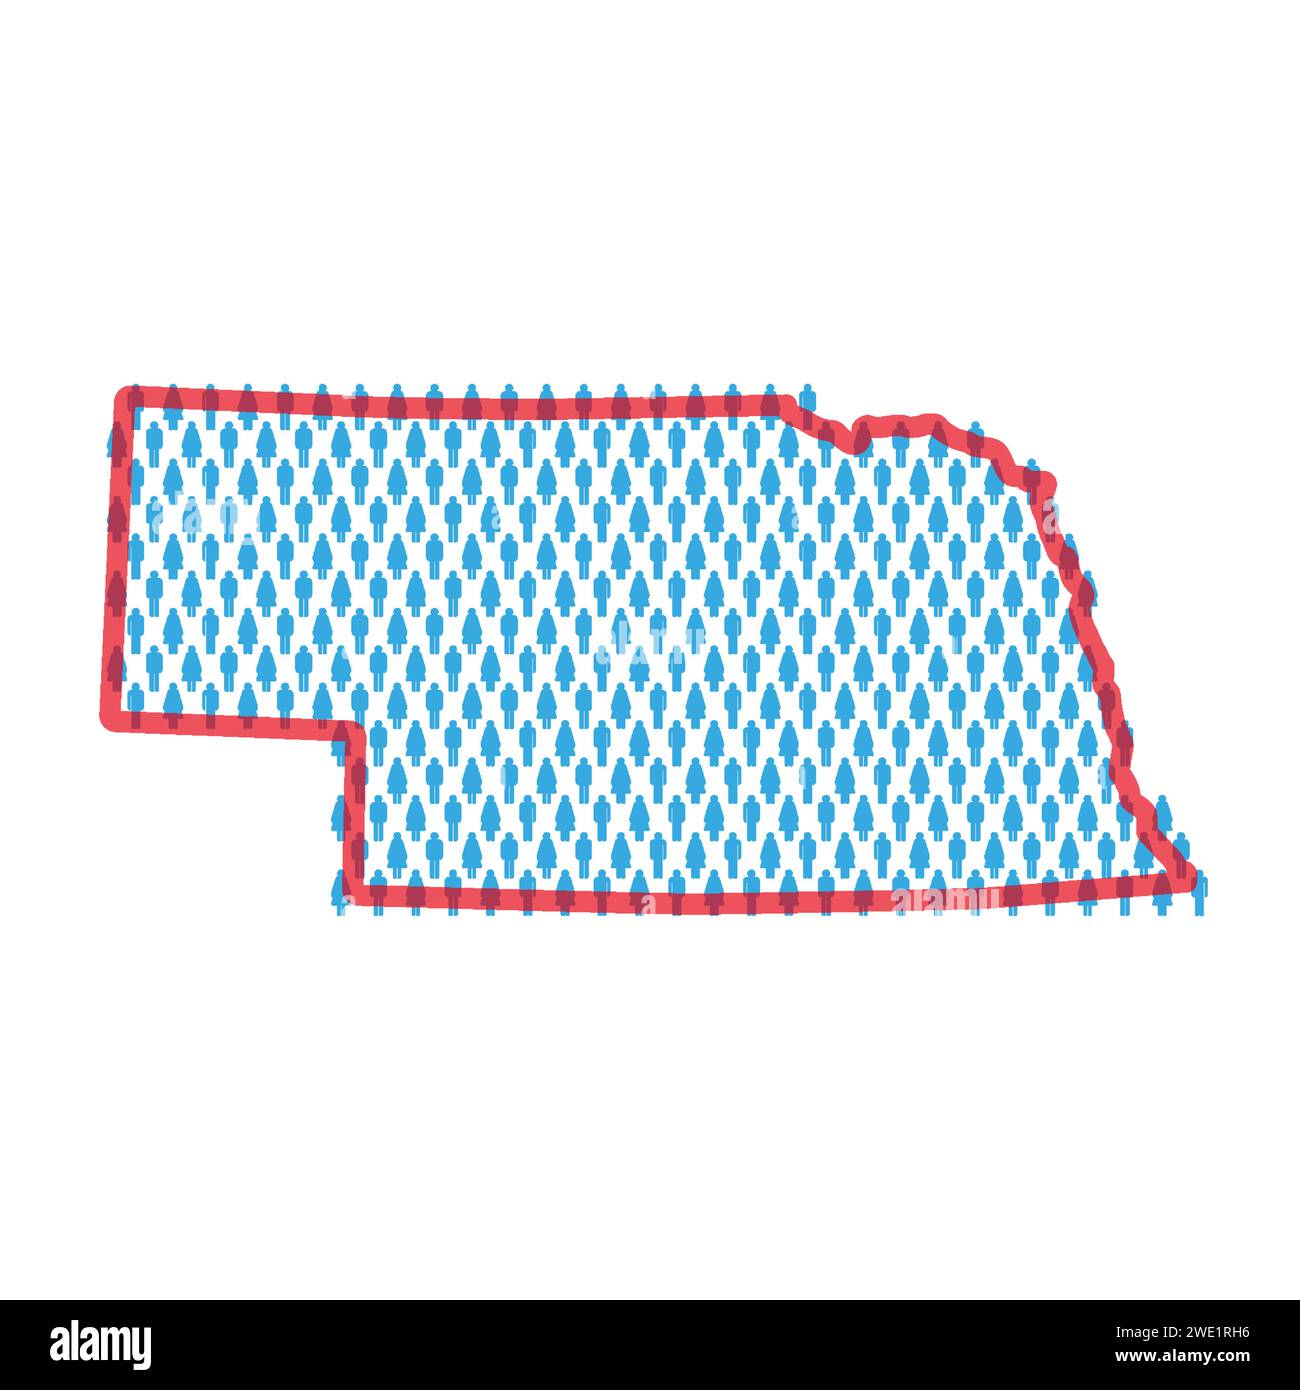 Nebraska population map. Stick figures people map with bold red translucent state border. Pattern of men and women icons. Isolated vector illustration Stock Vector